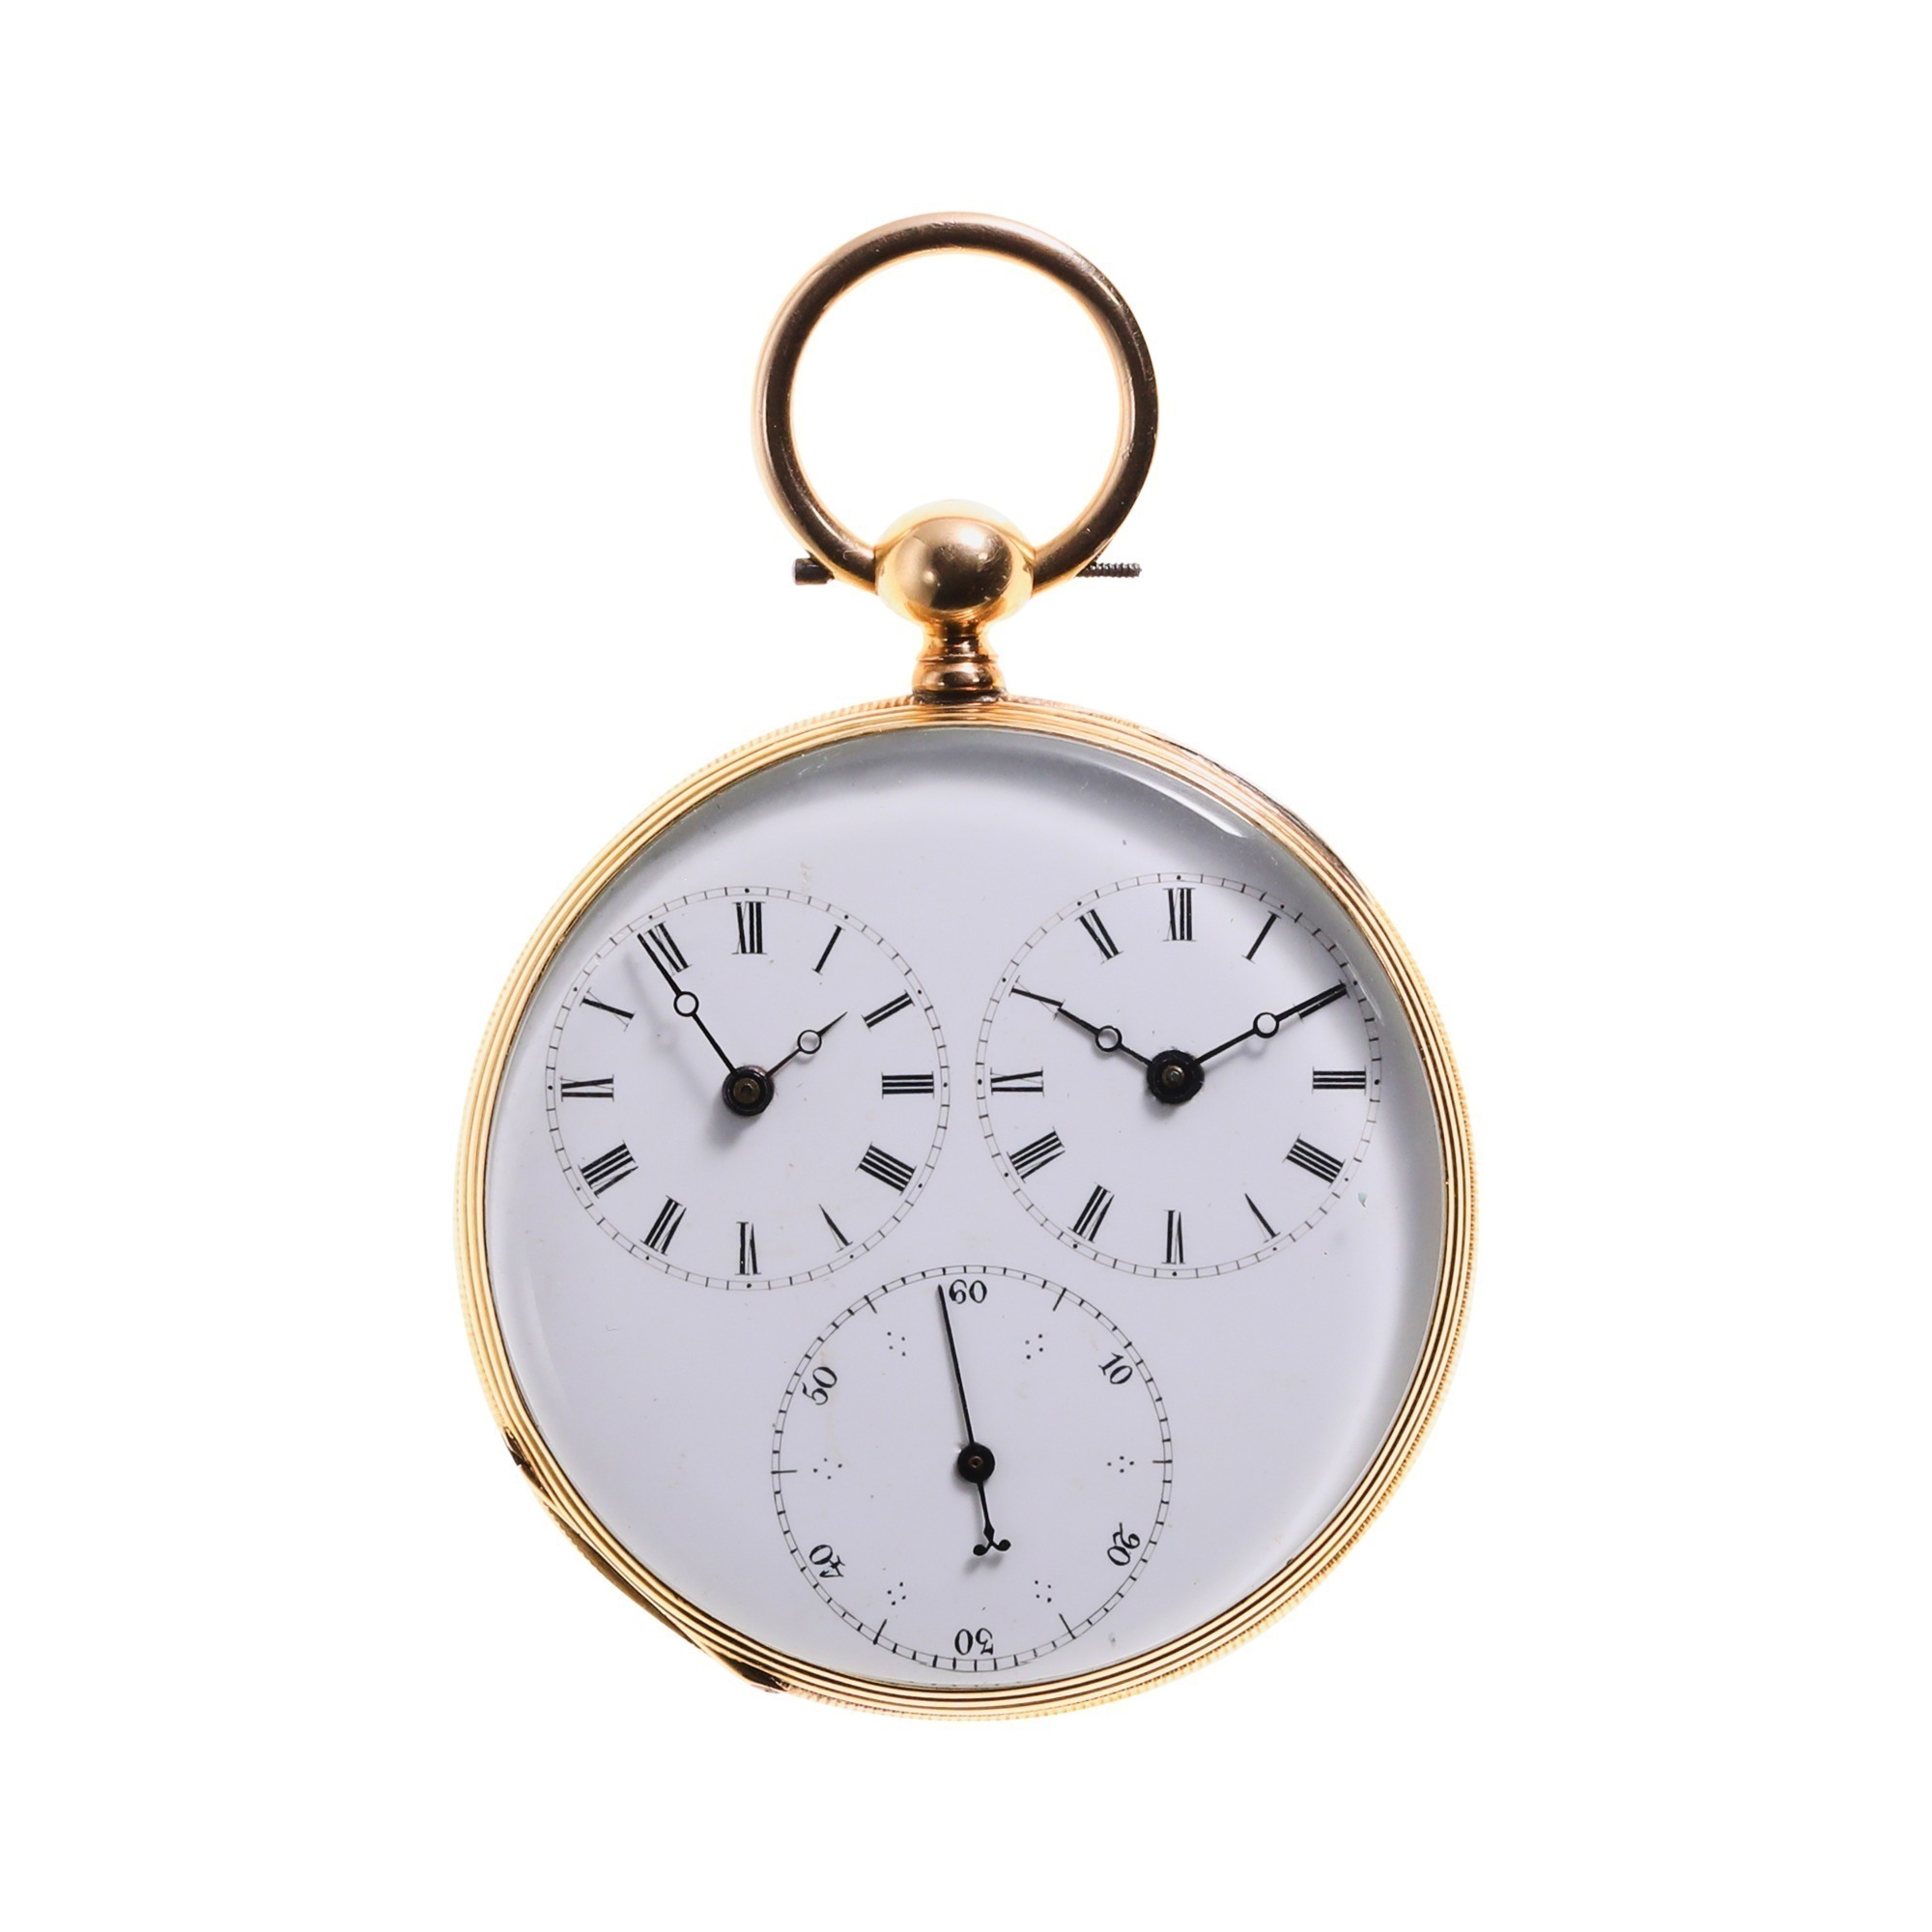 Captain's Two Time Zone Key Wind Open Face Pocket Watch